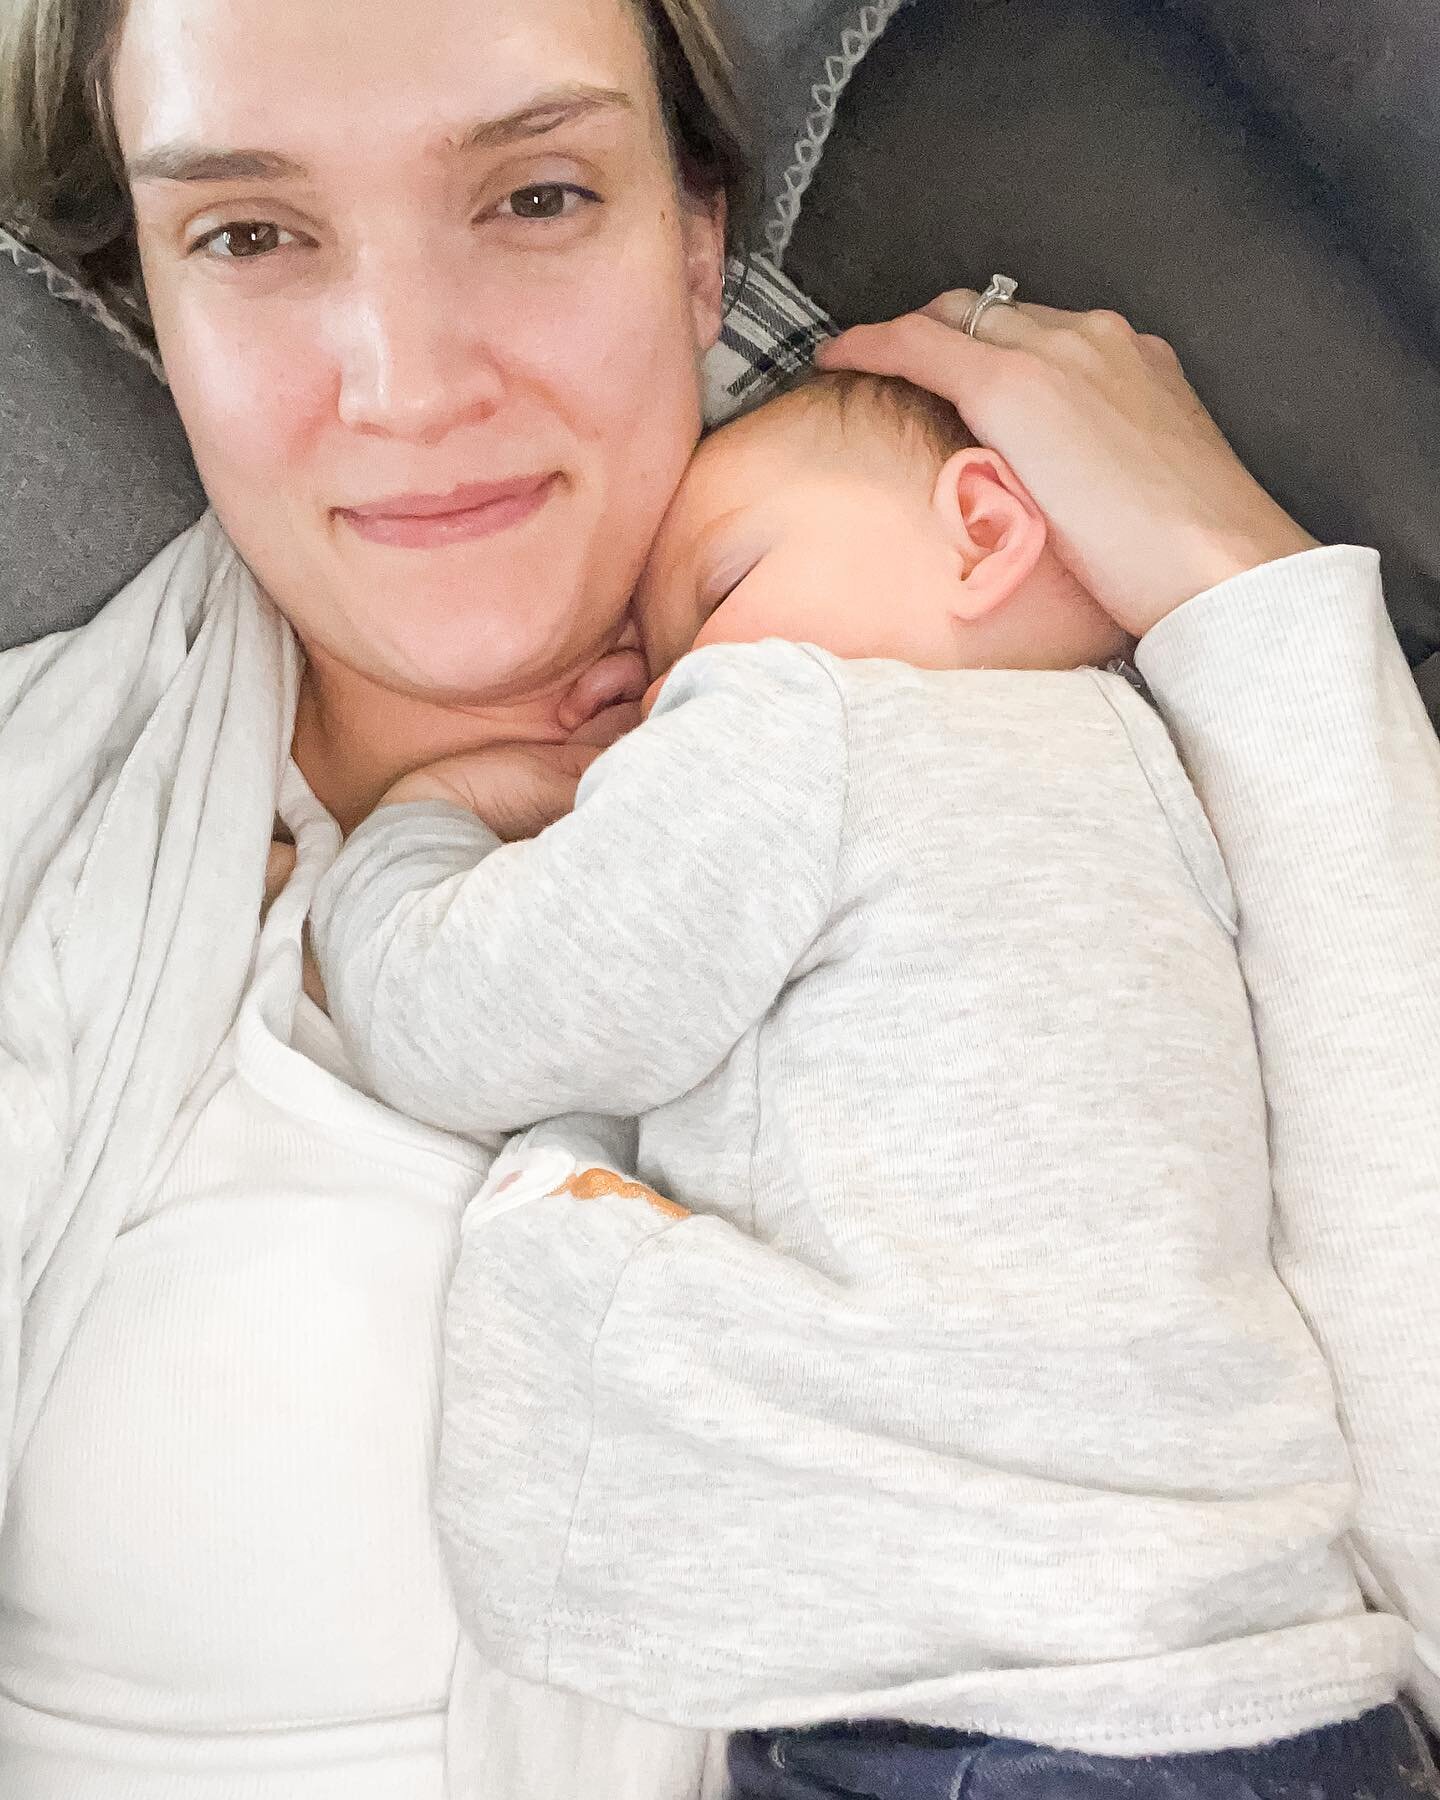 All the feels right now as my sweet 9 month old naps on my chest. This is rare - but after a short crib nap, all she wanted was to nuzzle up with mama - and I&rsquo;m ok with this ❤️. Swipe to see my precious girl as a 6 lb 9 oz. nugget 😍. Also yes 